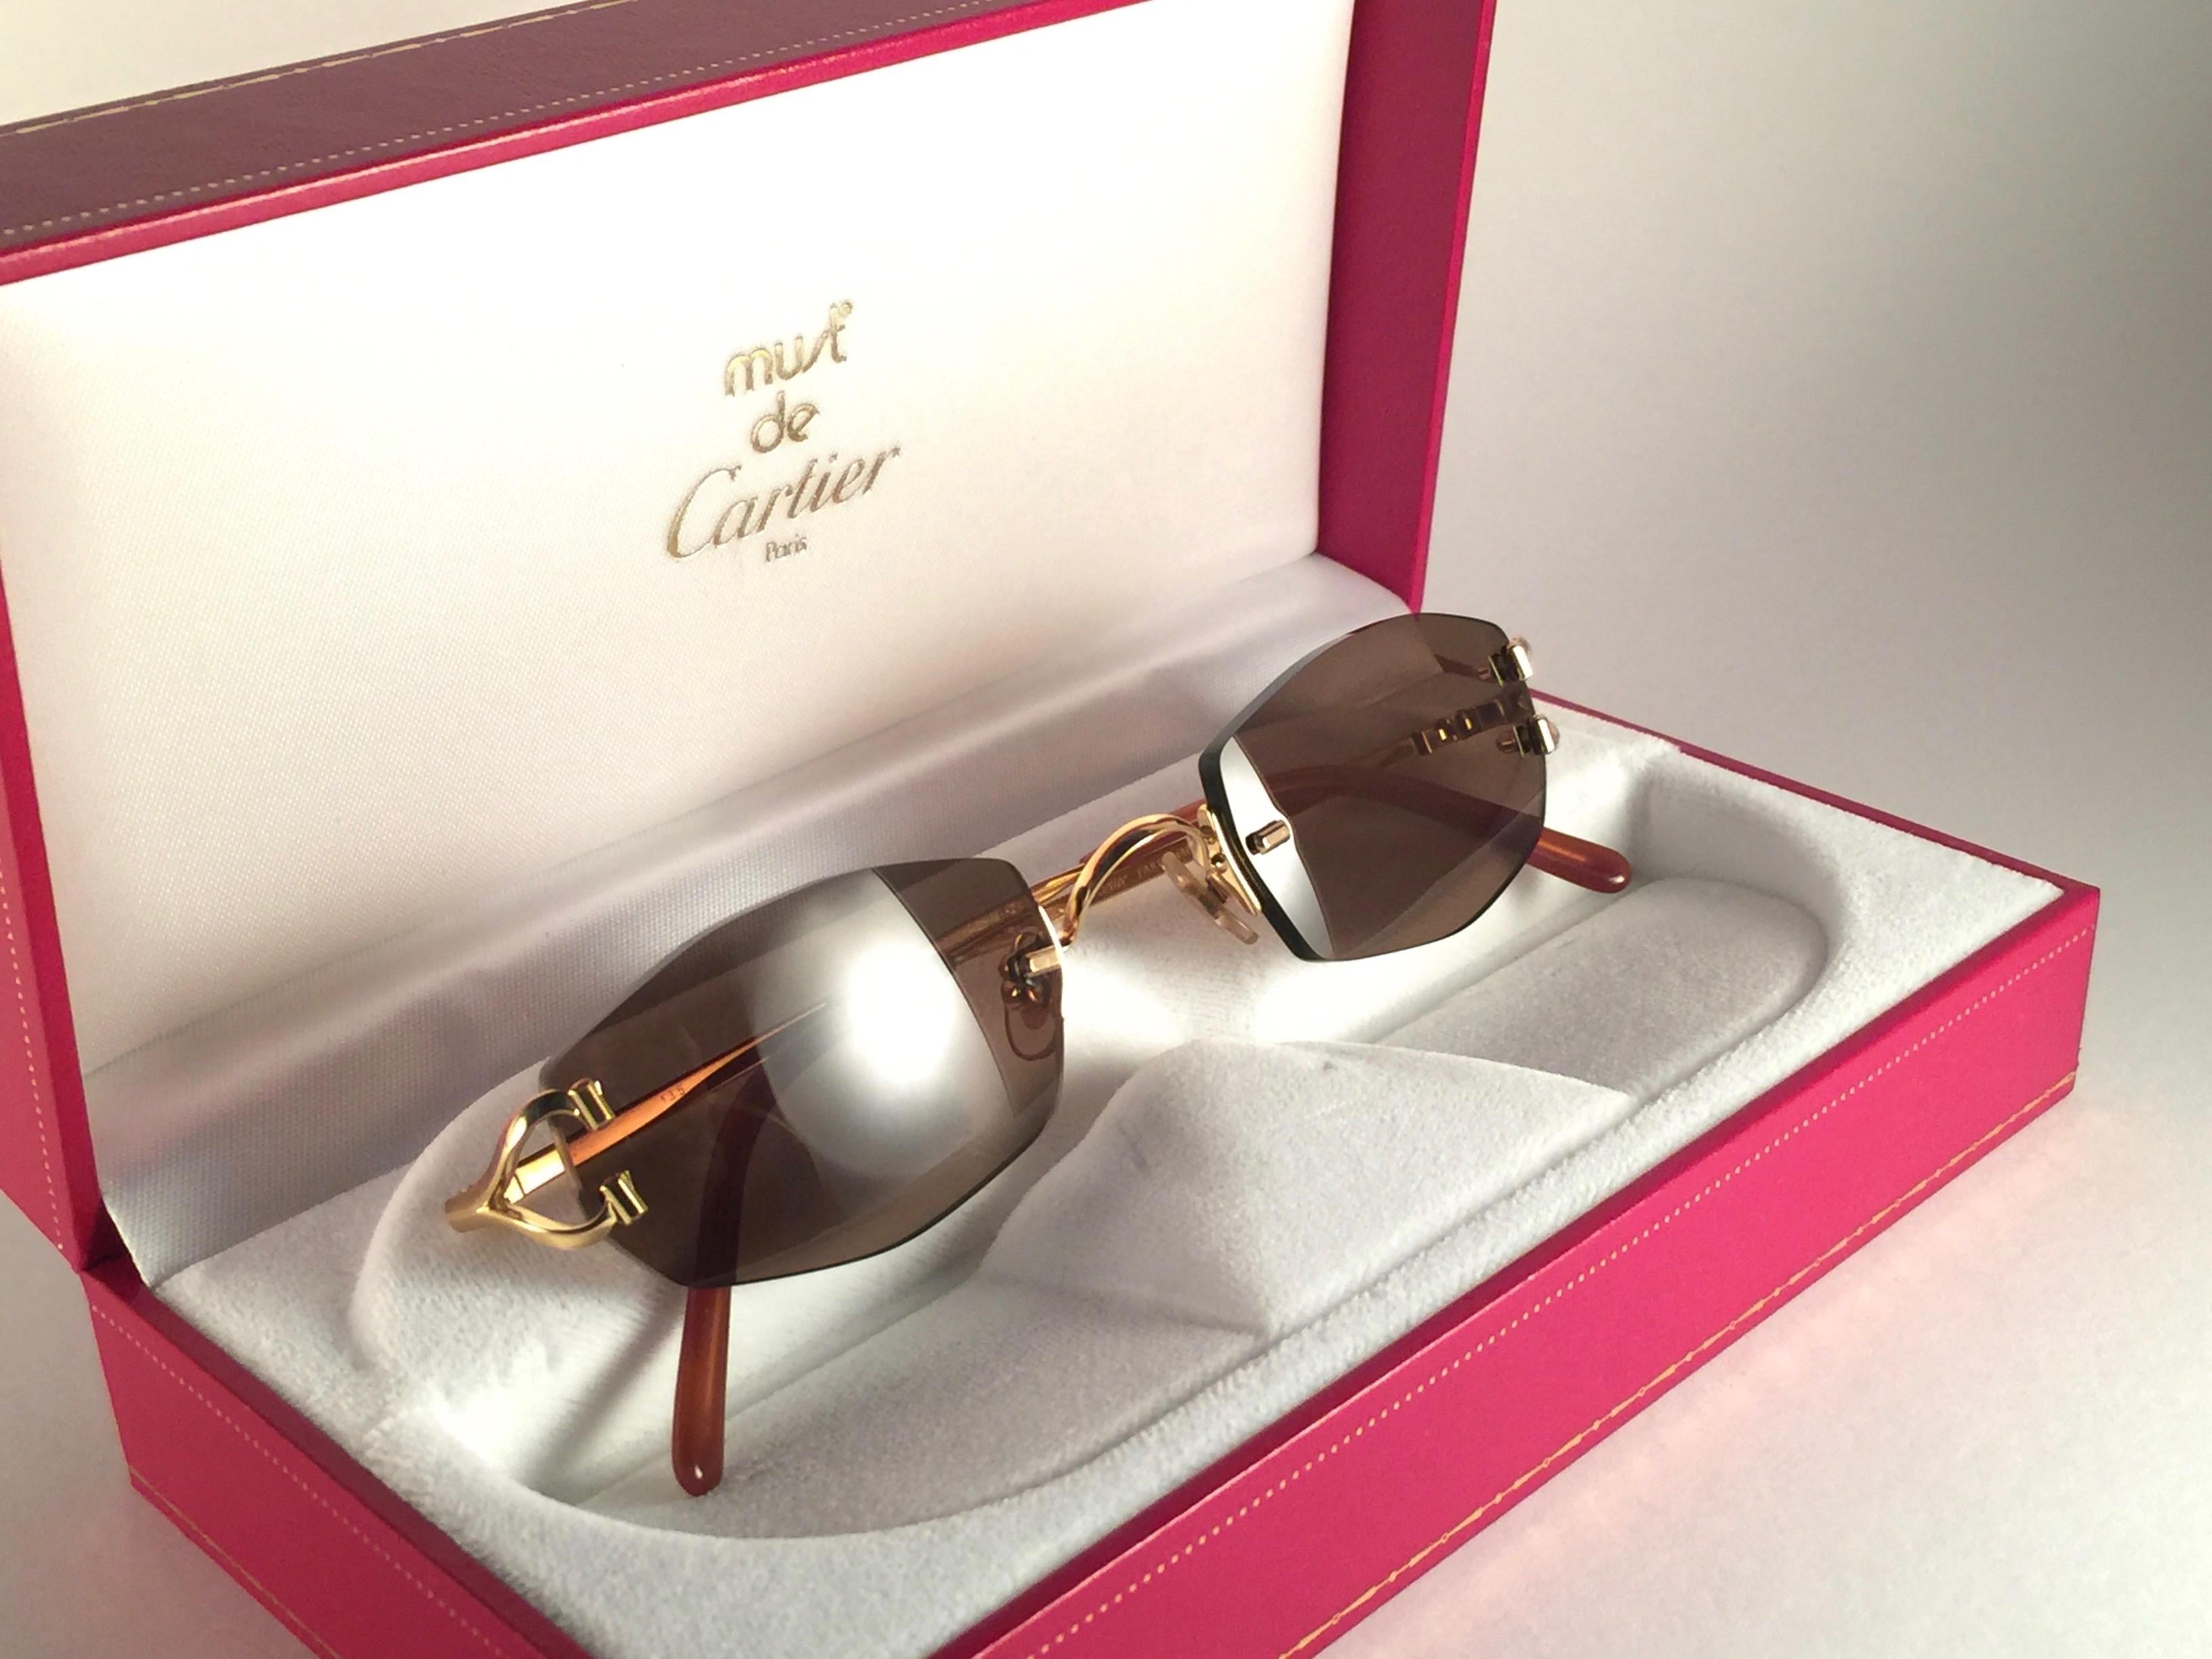 New 1990 Cartier Capri unique rimless sunglasses with brown (uv protection) lenses. Frame with the front and sides in gold.  All hallmarks. Cartier gold signs on the honey brown ear paddles. These are like a pair of jewels on your nose. 
Beautiful